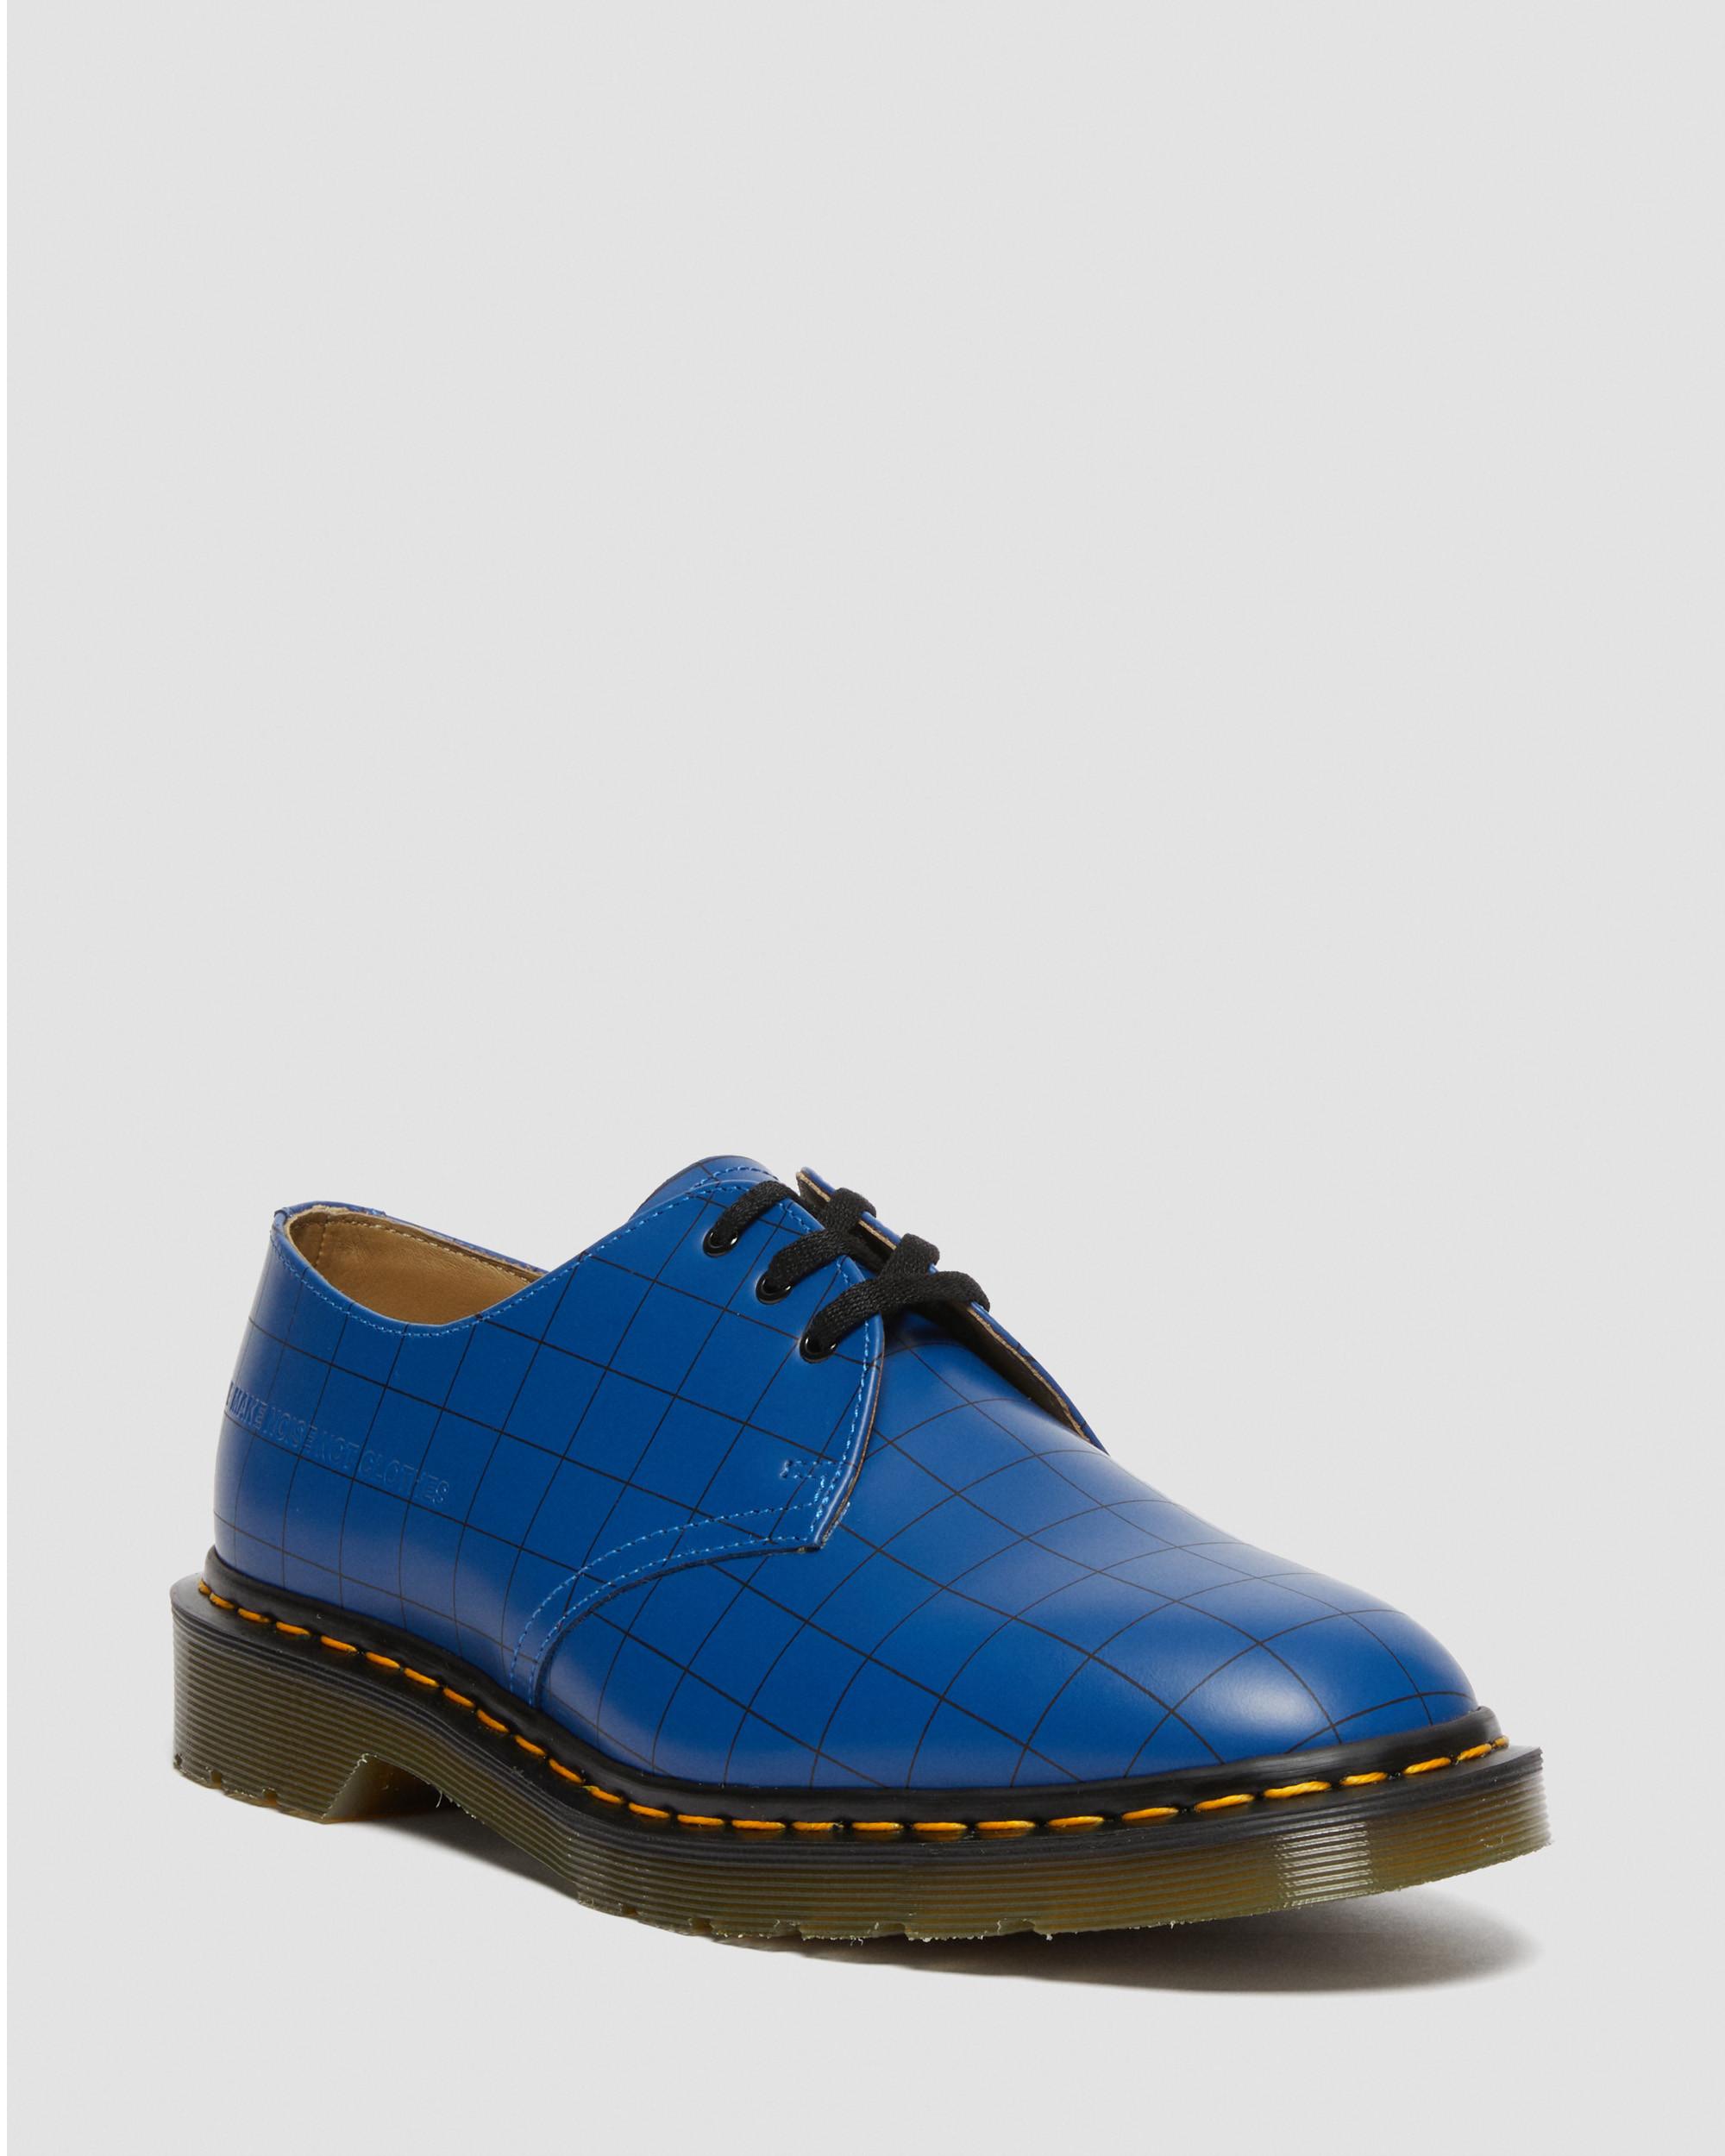 1461 Undercover Made in England Leather Oxford Shoes, Blue | Dr